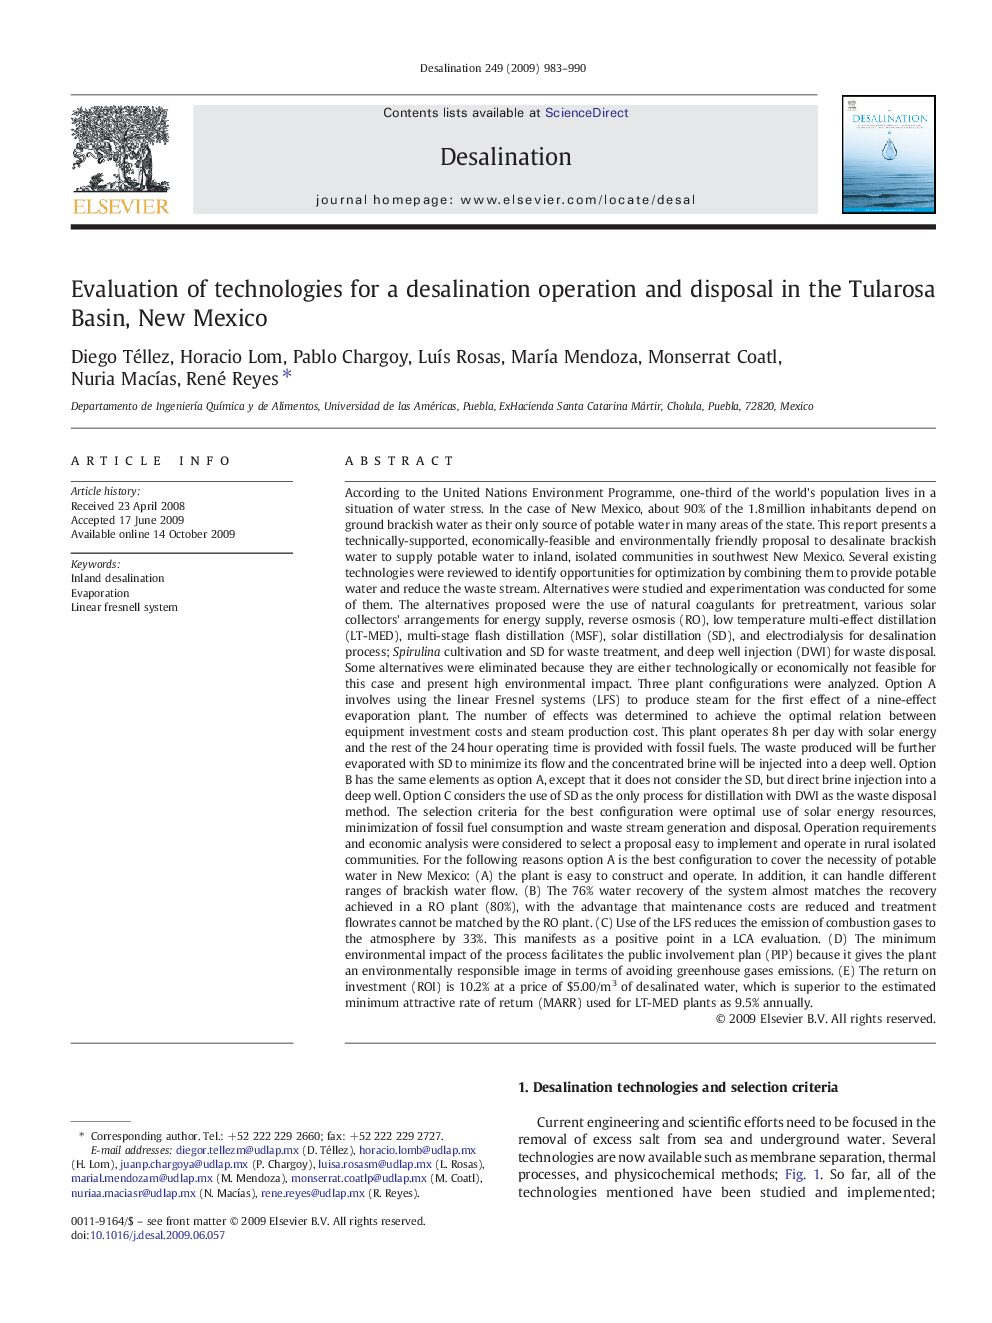 Evaluation of technologies for a desalination operation and disposal in the Tularosa Basin, New Mexico